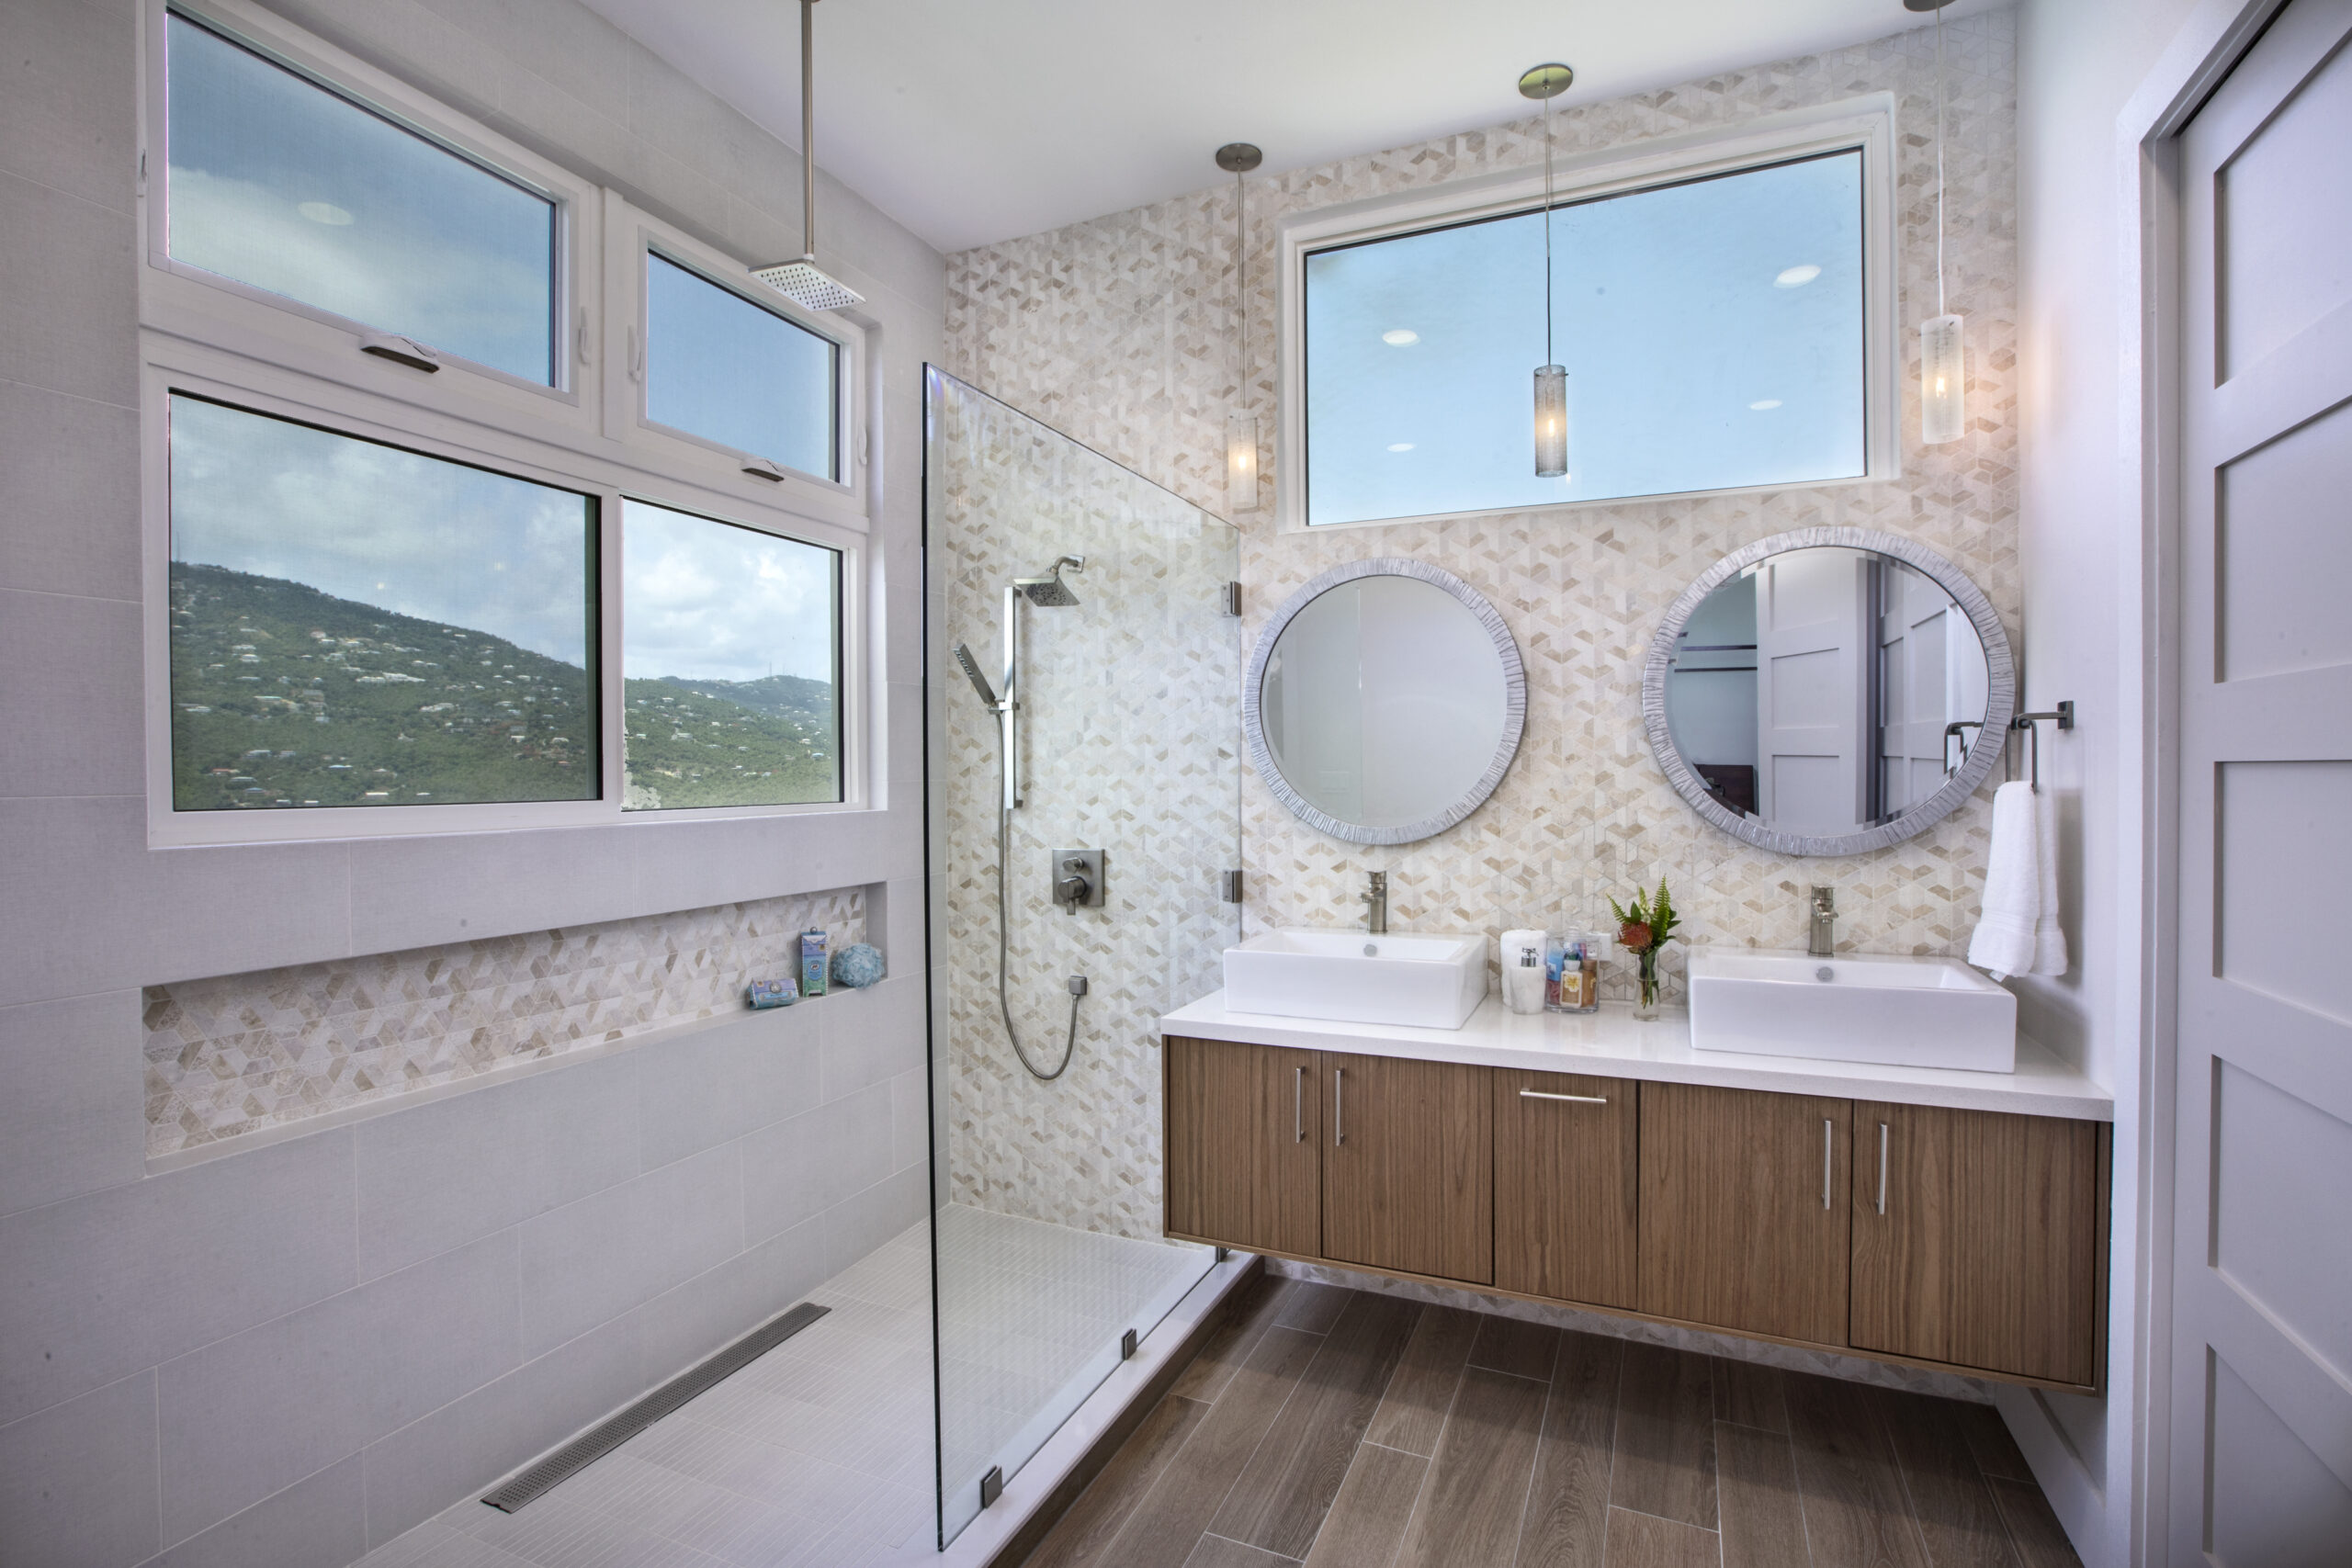 Double Vanity Bath with Waterfall show head and floating cabinetry with gorgeous views